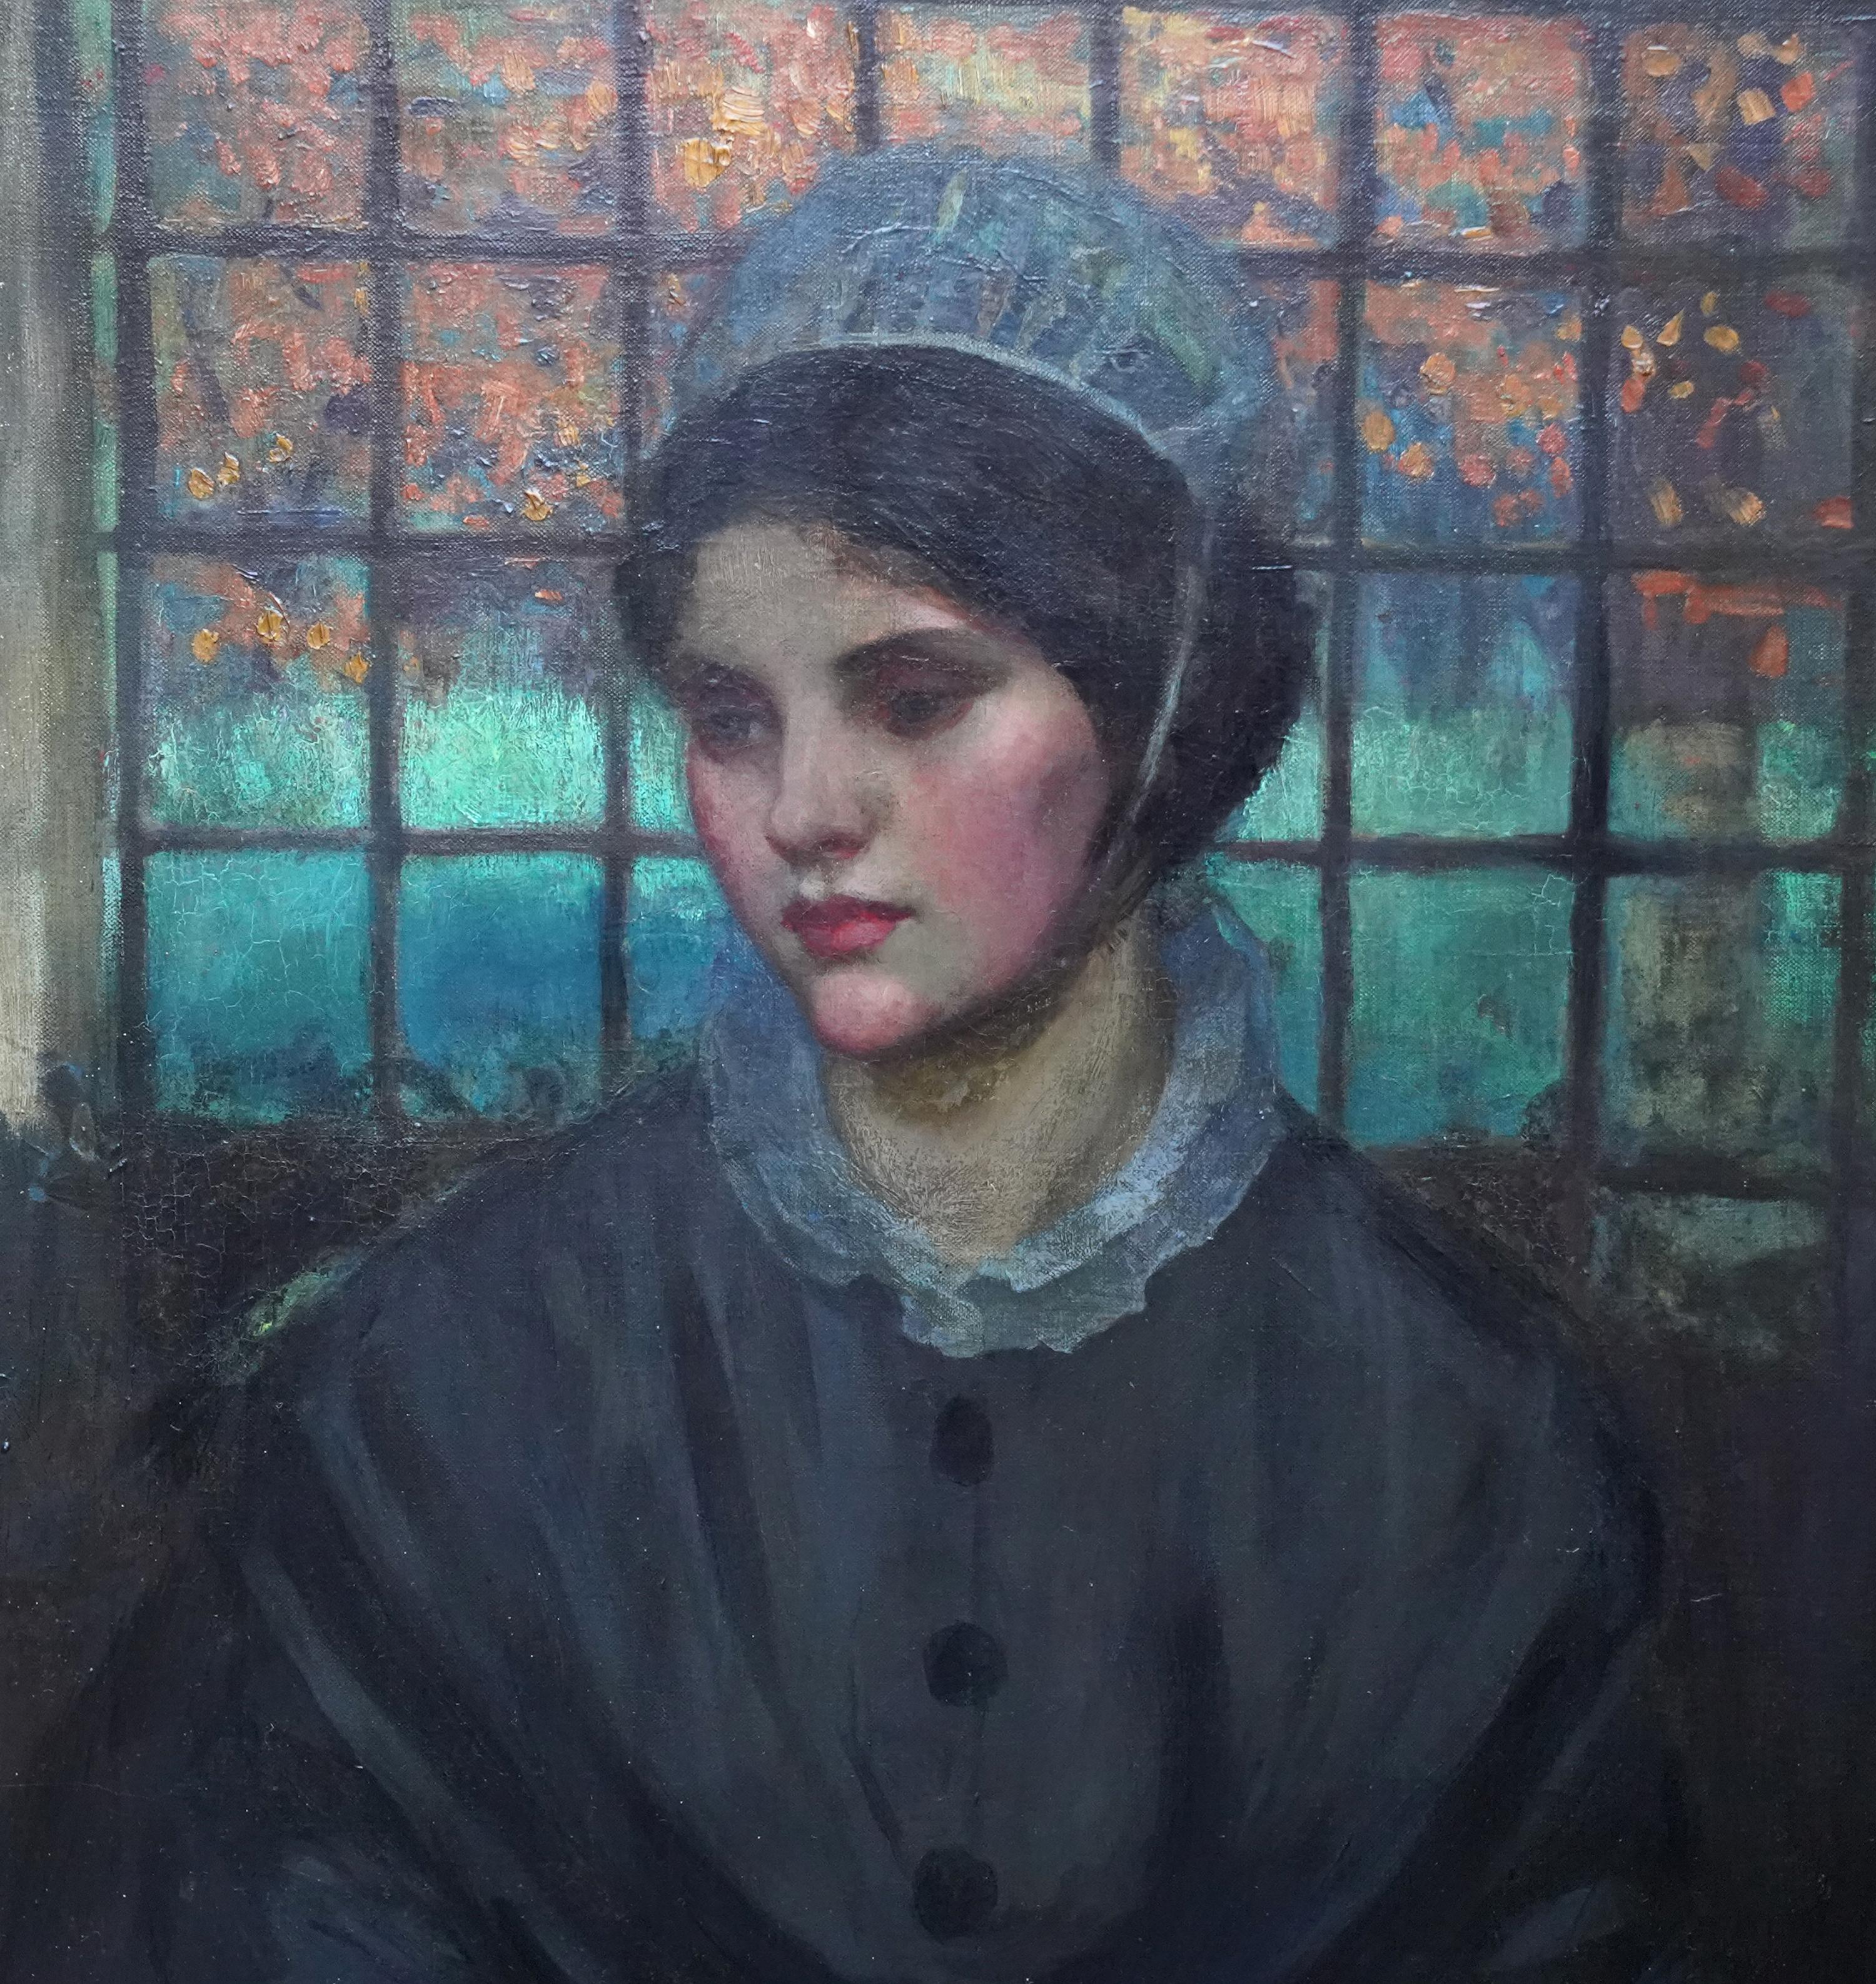 This beautiful British Edwardian portrait oil painting is by noted and much exhibited female artist Maud Marion Wear. Wear trained at the Royal Academy Schools in London for five years and then went on to combine teaching art and exhibiting for over